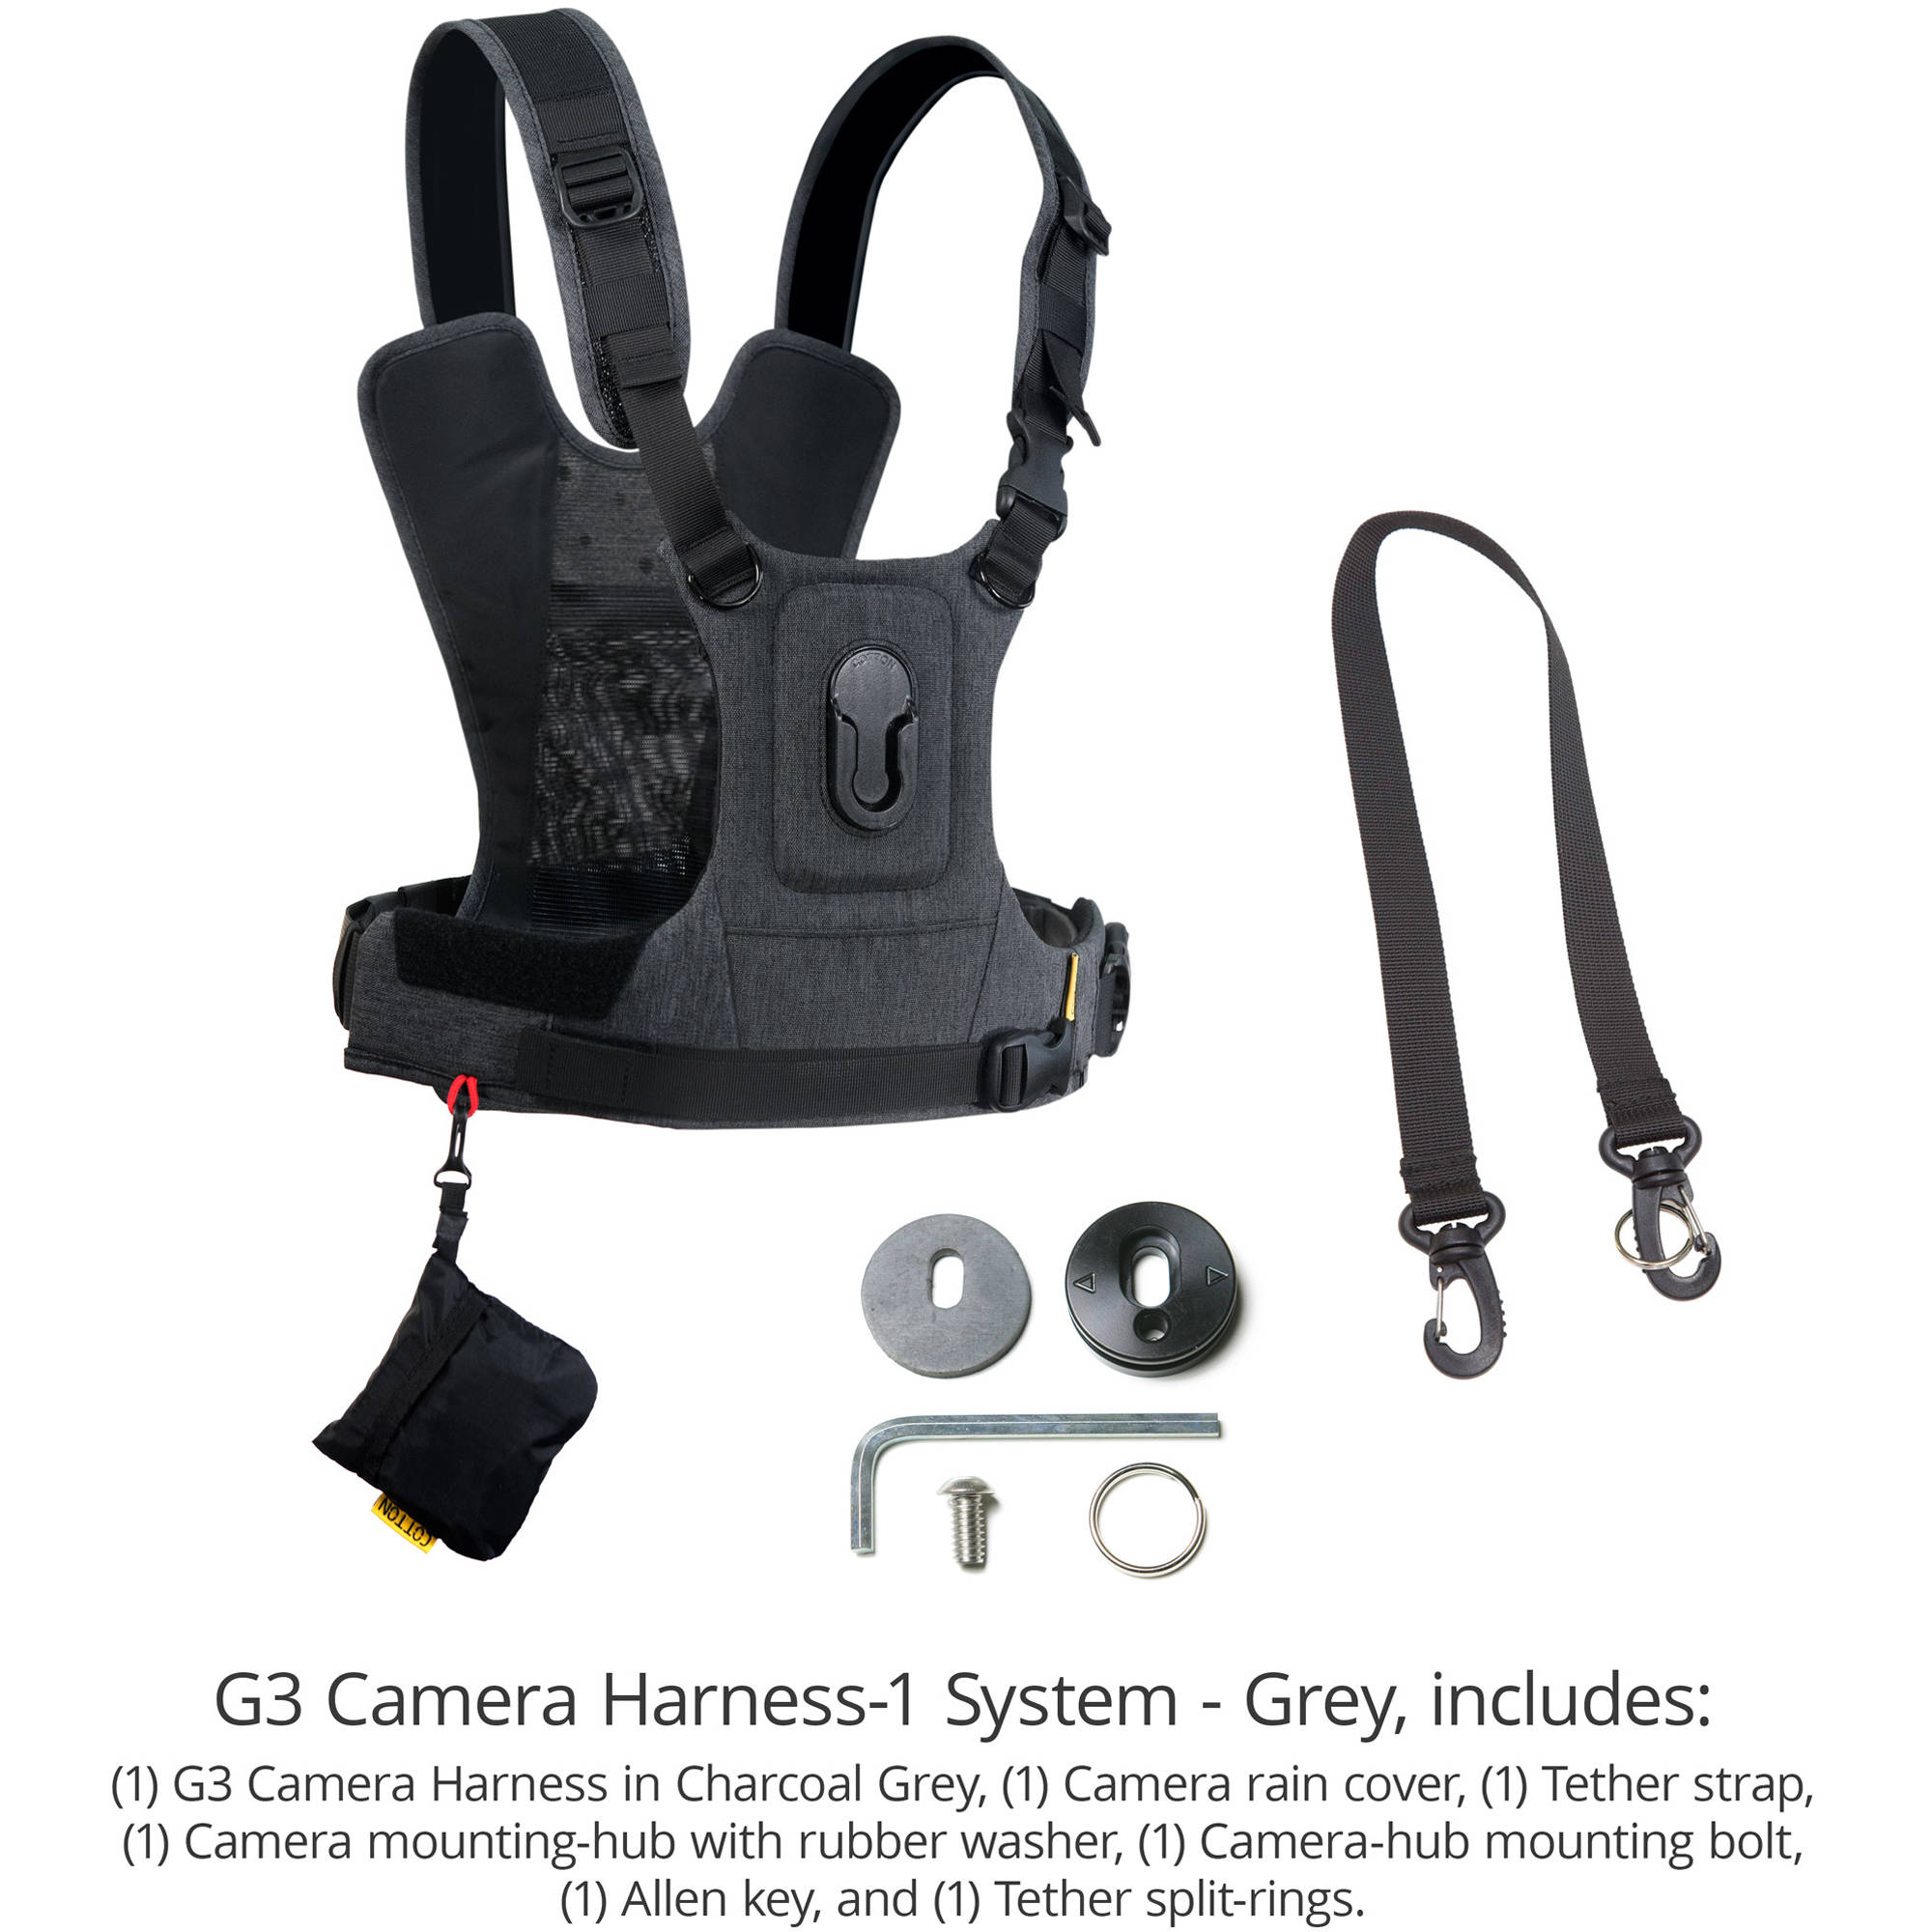 Cotton Carrier CCS G3 Camera Harness-1 - Gray